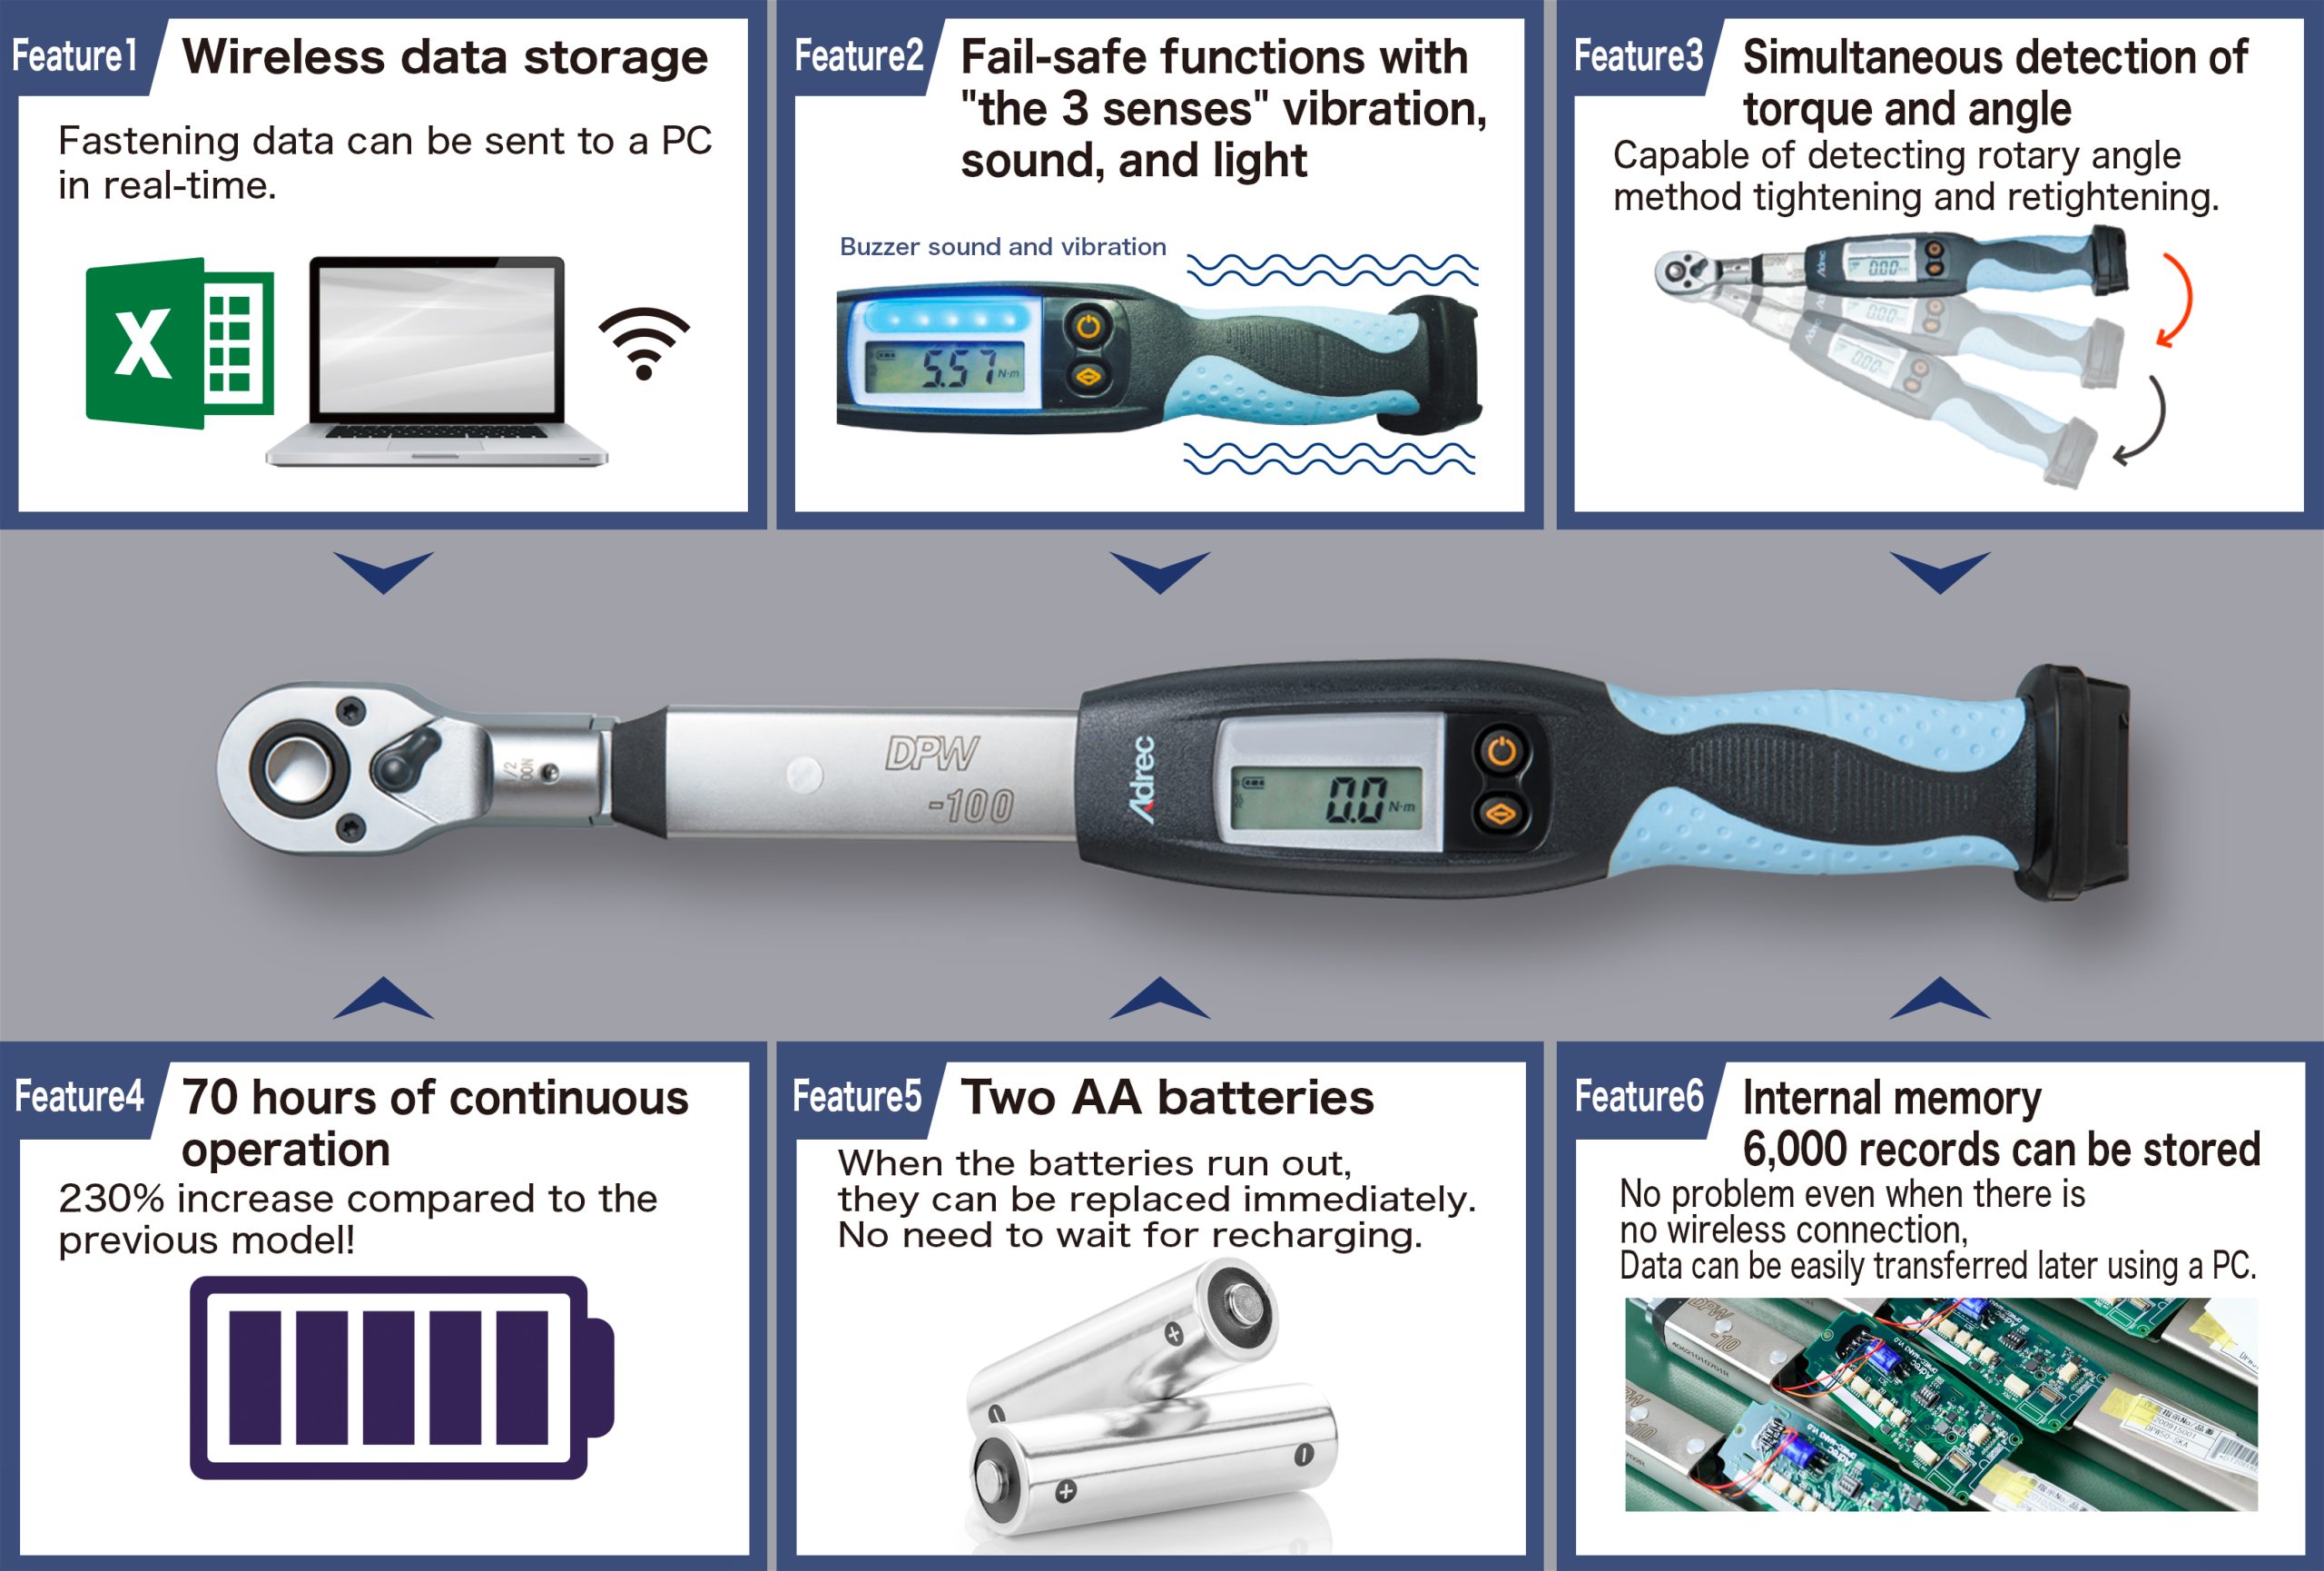 Features of Adrec's digital torque wrench "ProWrench"